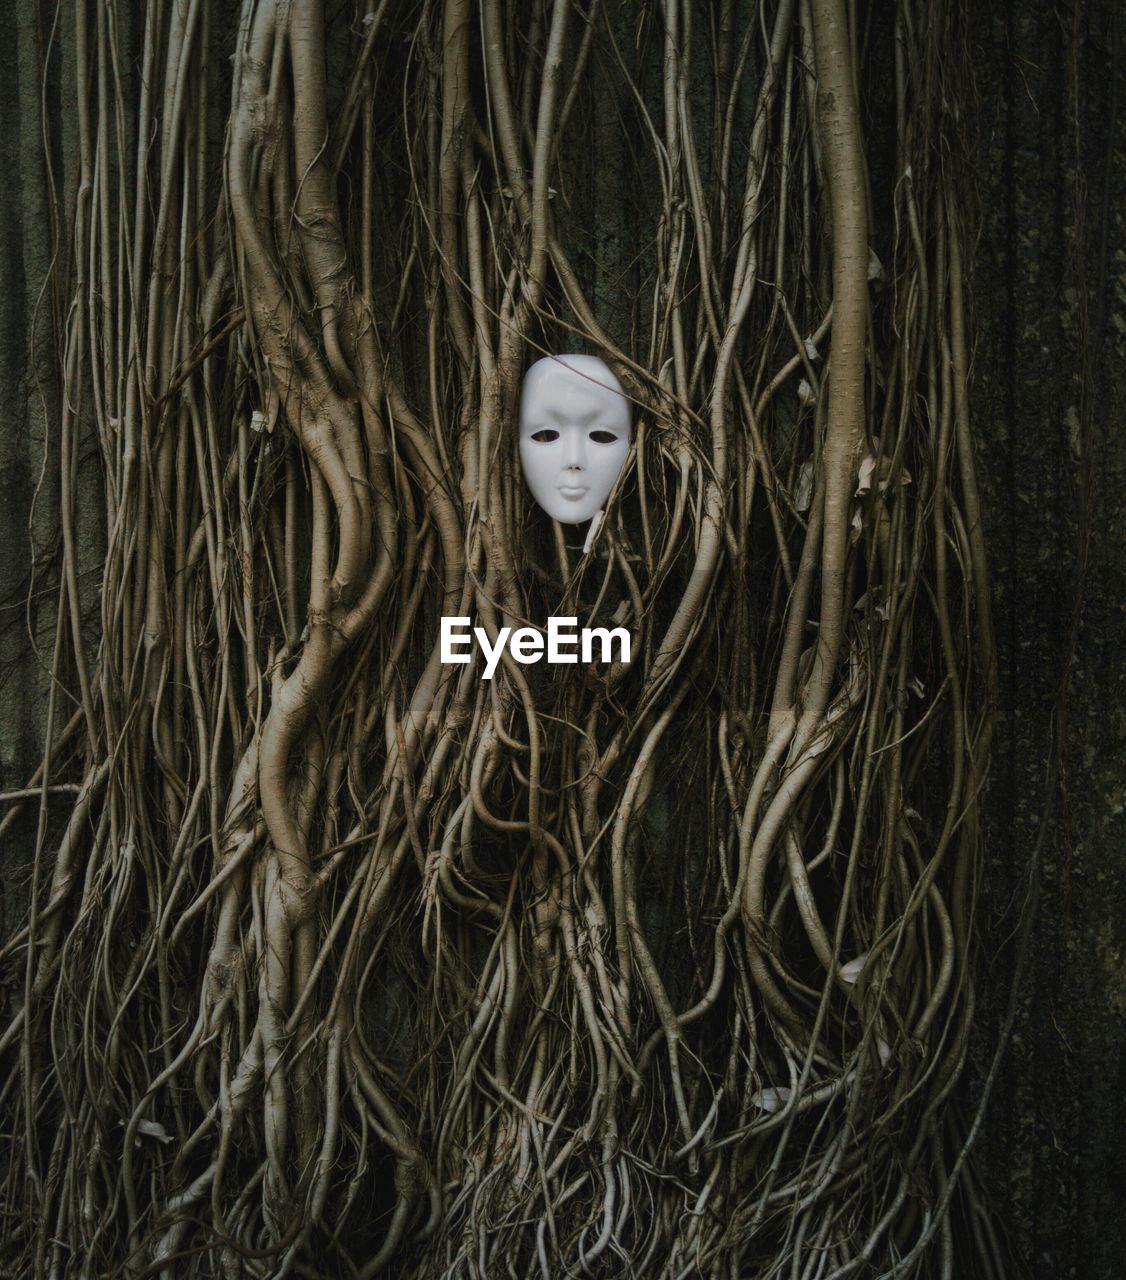 Mask amidst roots of tree